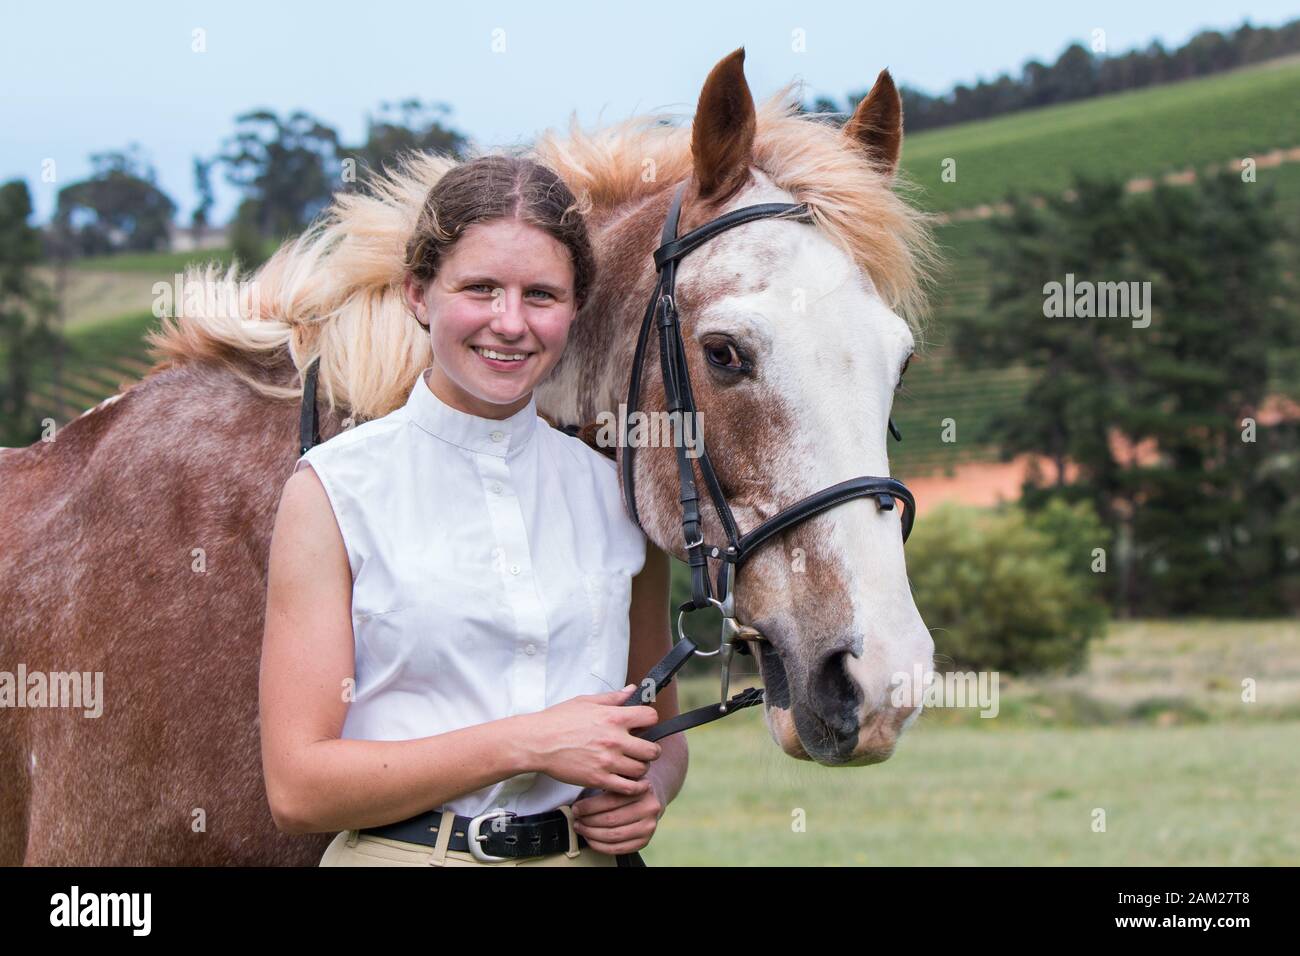 Girl standing next to her Sabino paint horse smiling both facing the camera close up. Stock Photo